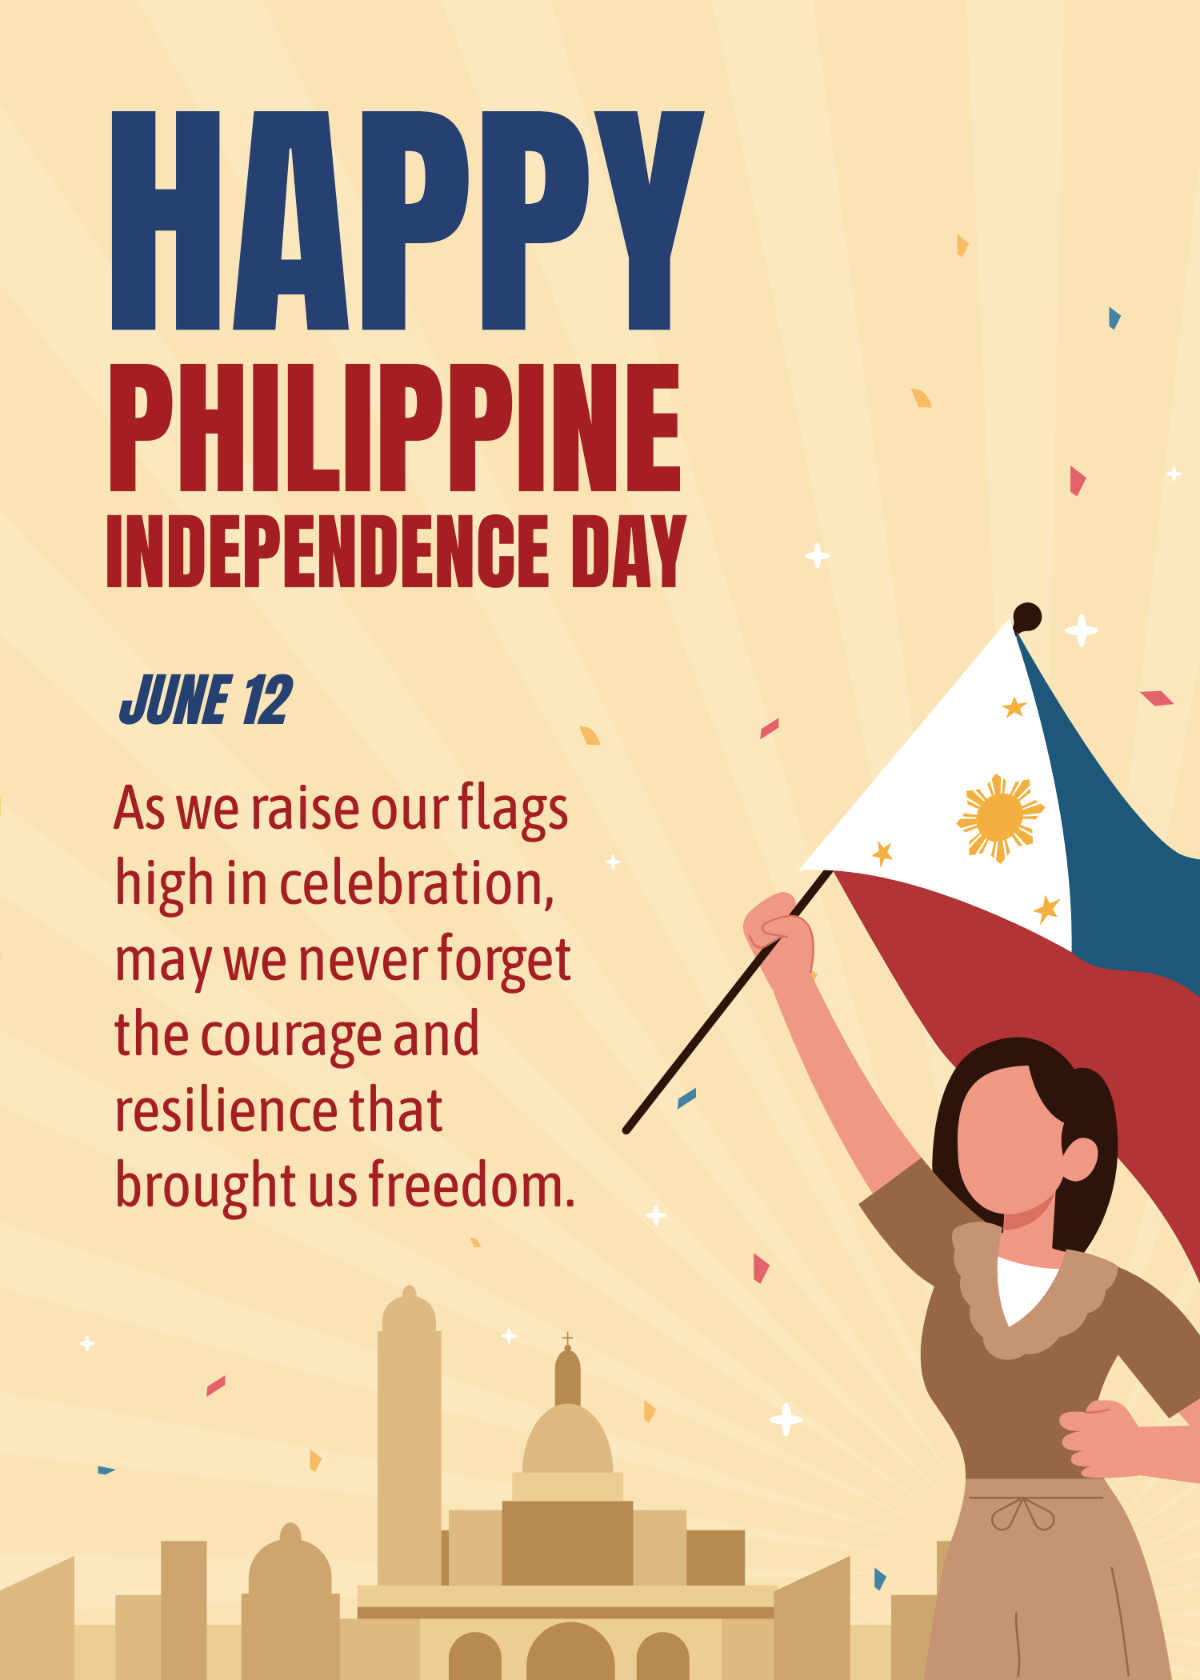 Philippines Independence Day Wishes